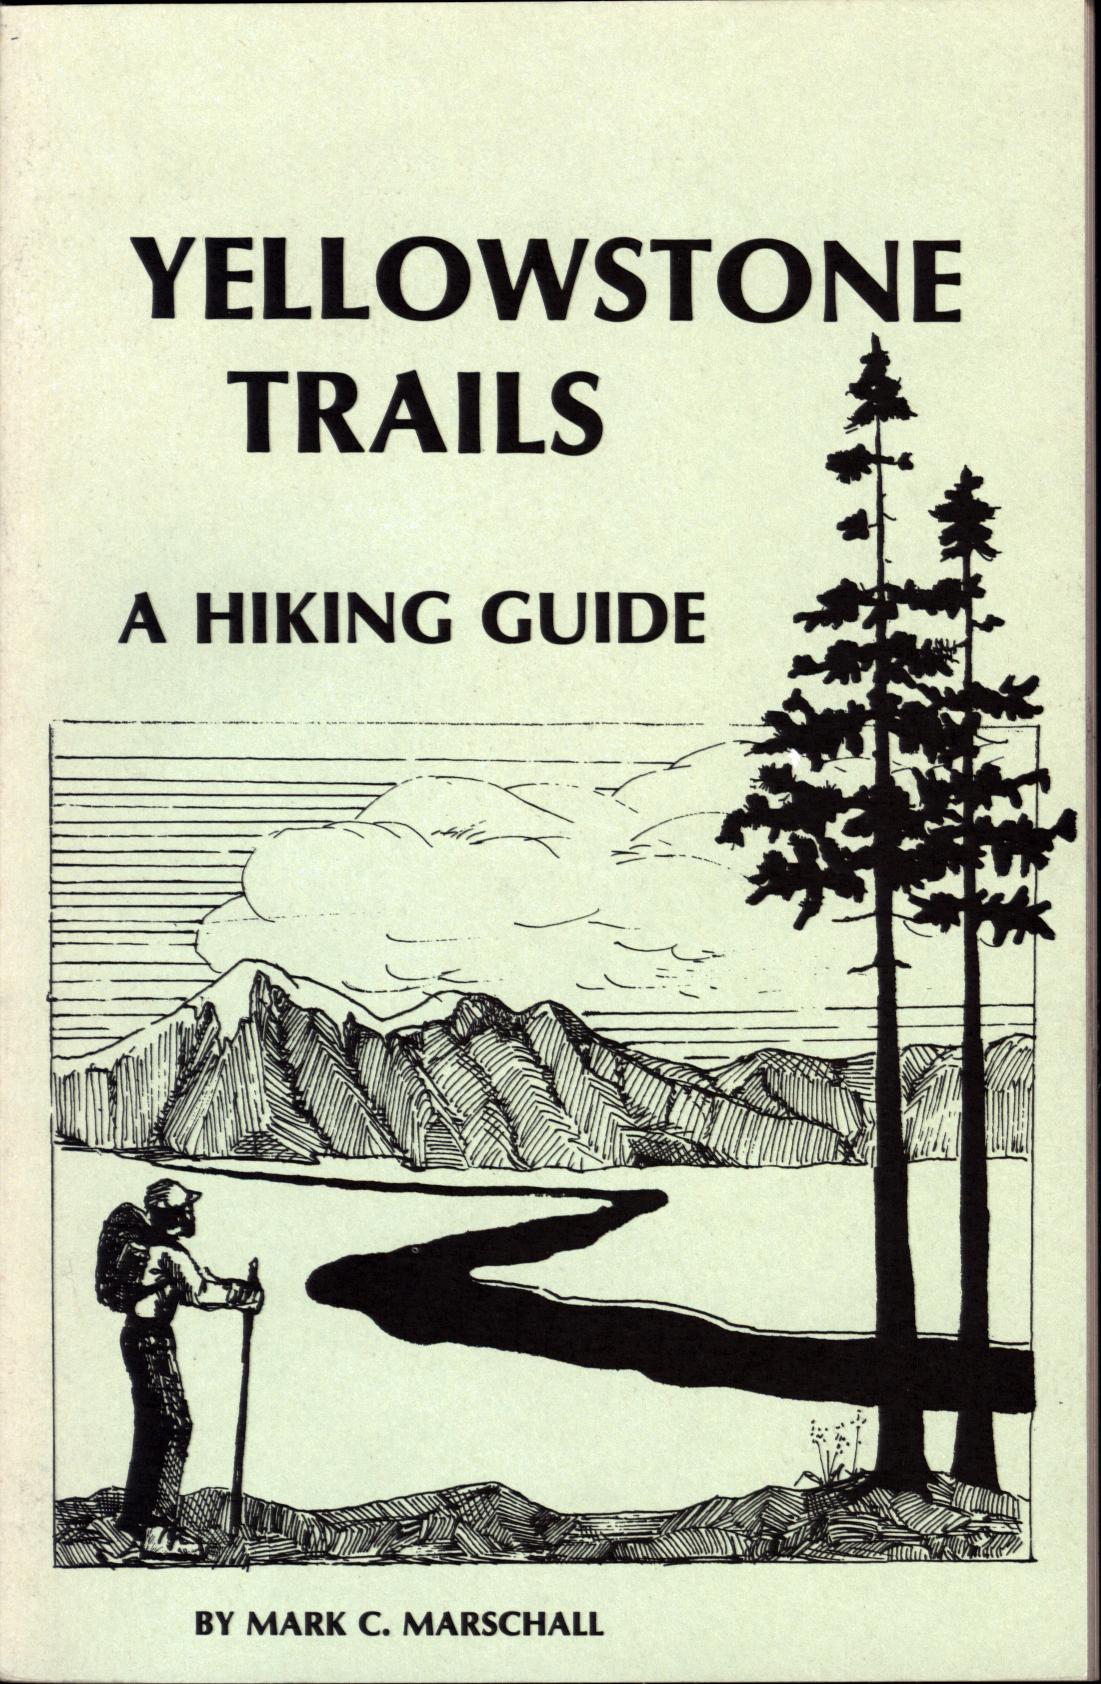 YELLOWSTONE TRAILS--a hiking guide.